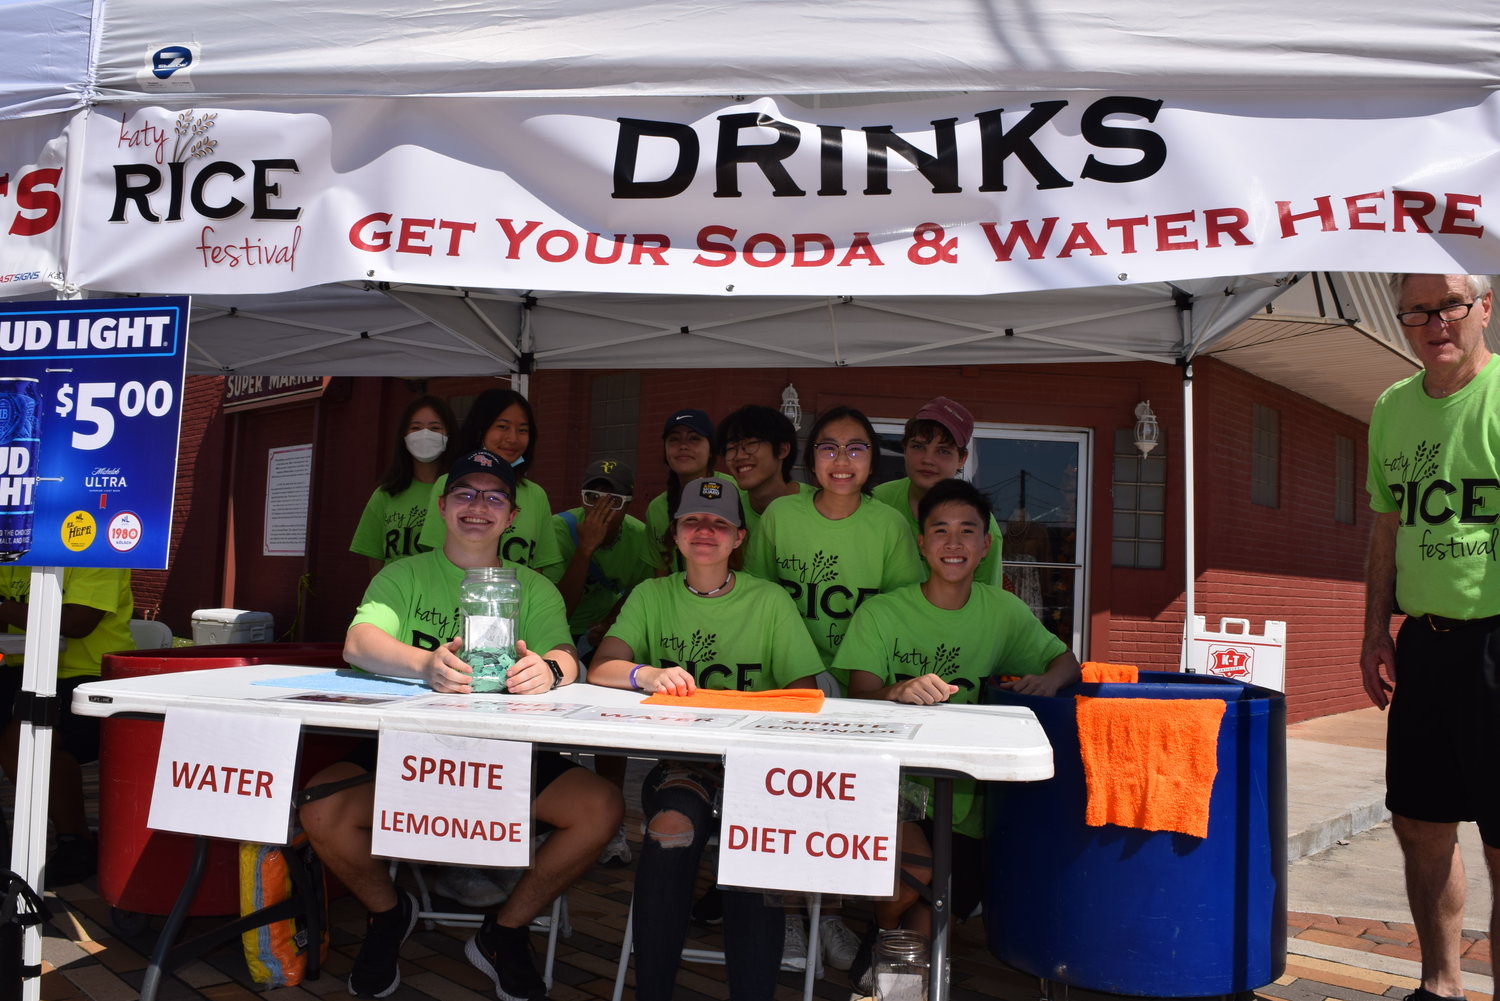 Former Katy Mayor Skip Conner (far right) helps volunteers at a drink tent. The Katy Rice Festival is mostly run by volunteers with the help of city staff and consultants to ensure everything stays on track. Over the last few years, the neon shirts worn by festival volunteers have become somewhat iconic.